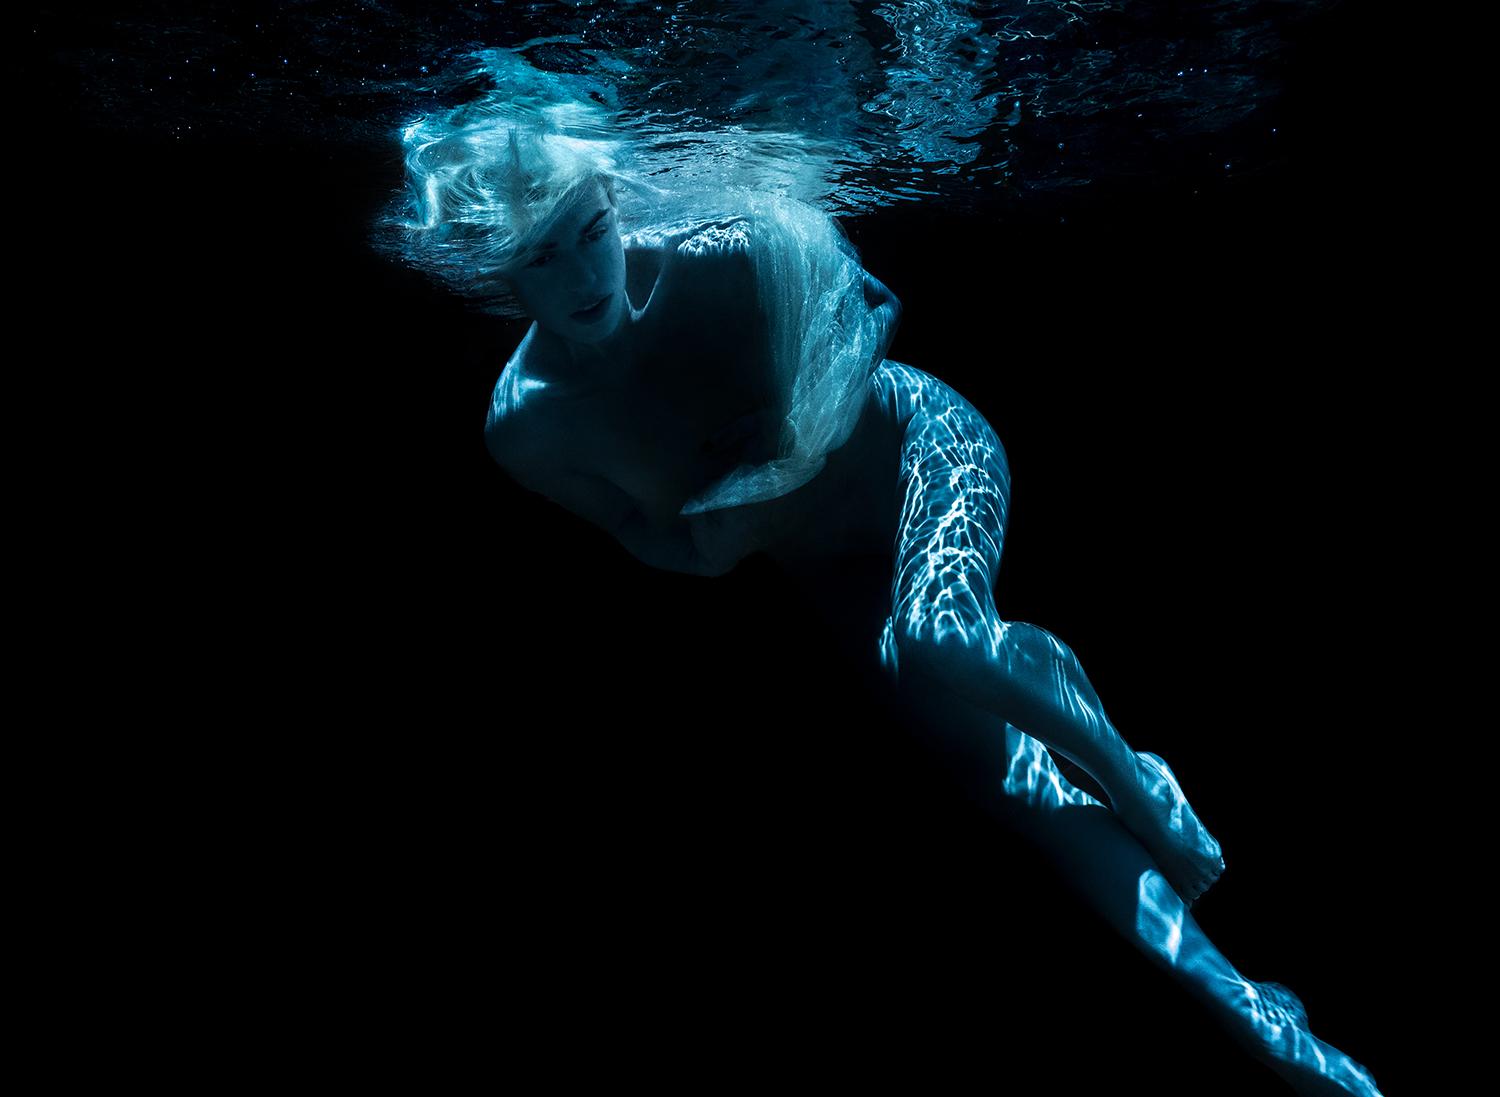 Deep Anesthesia - underwater nude photograph - archival print 17 x 23.5